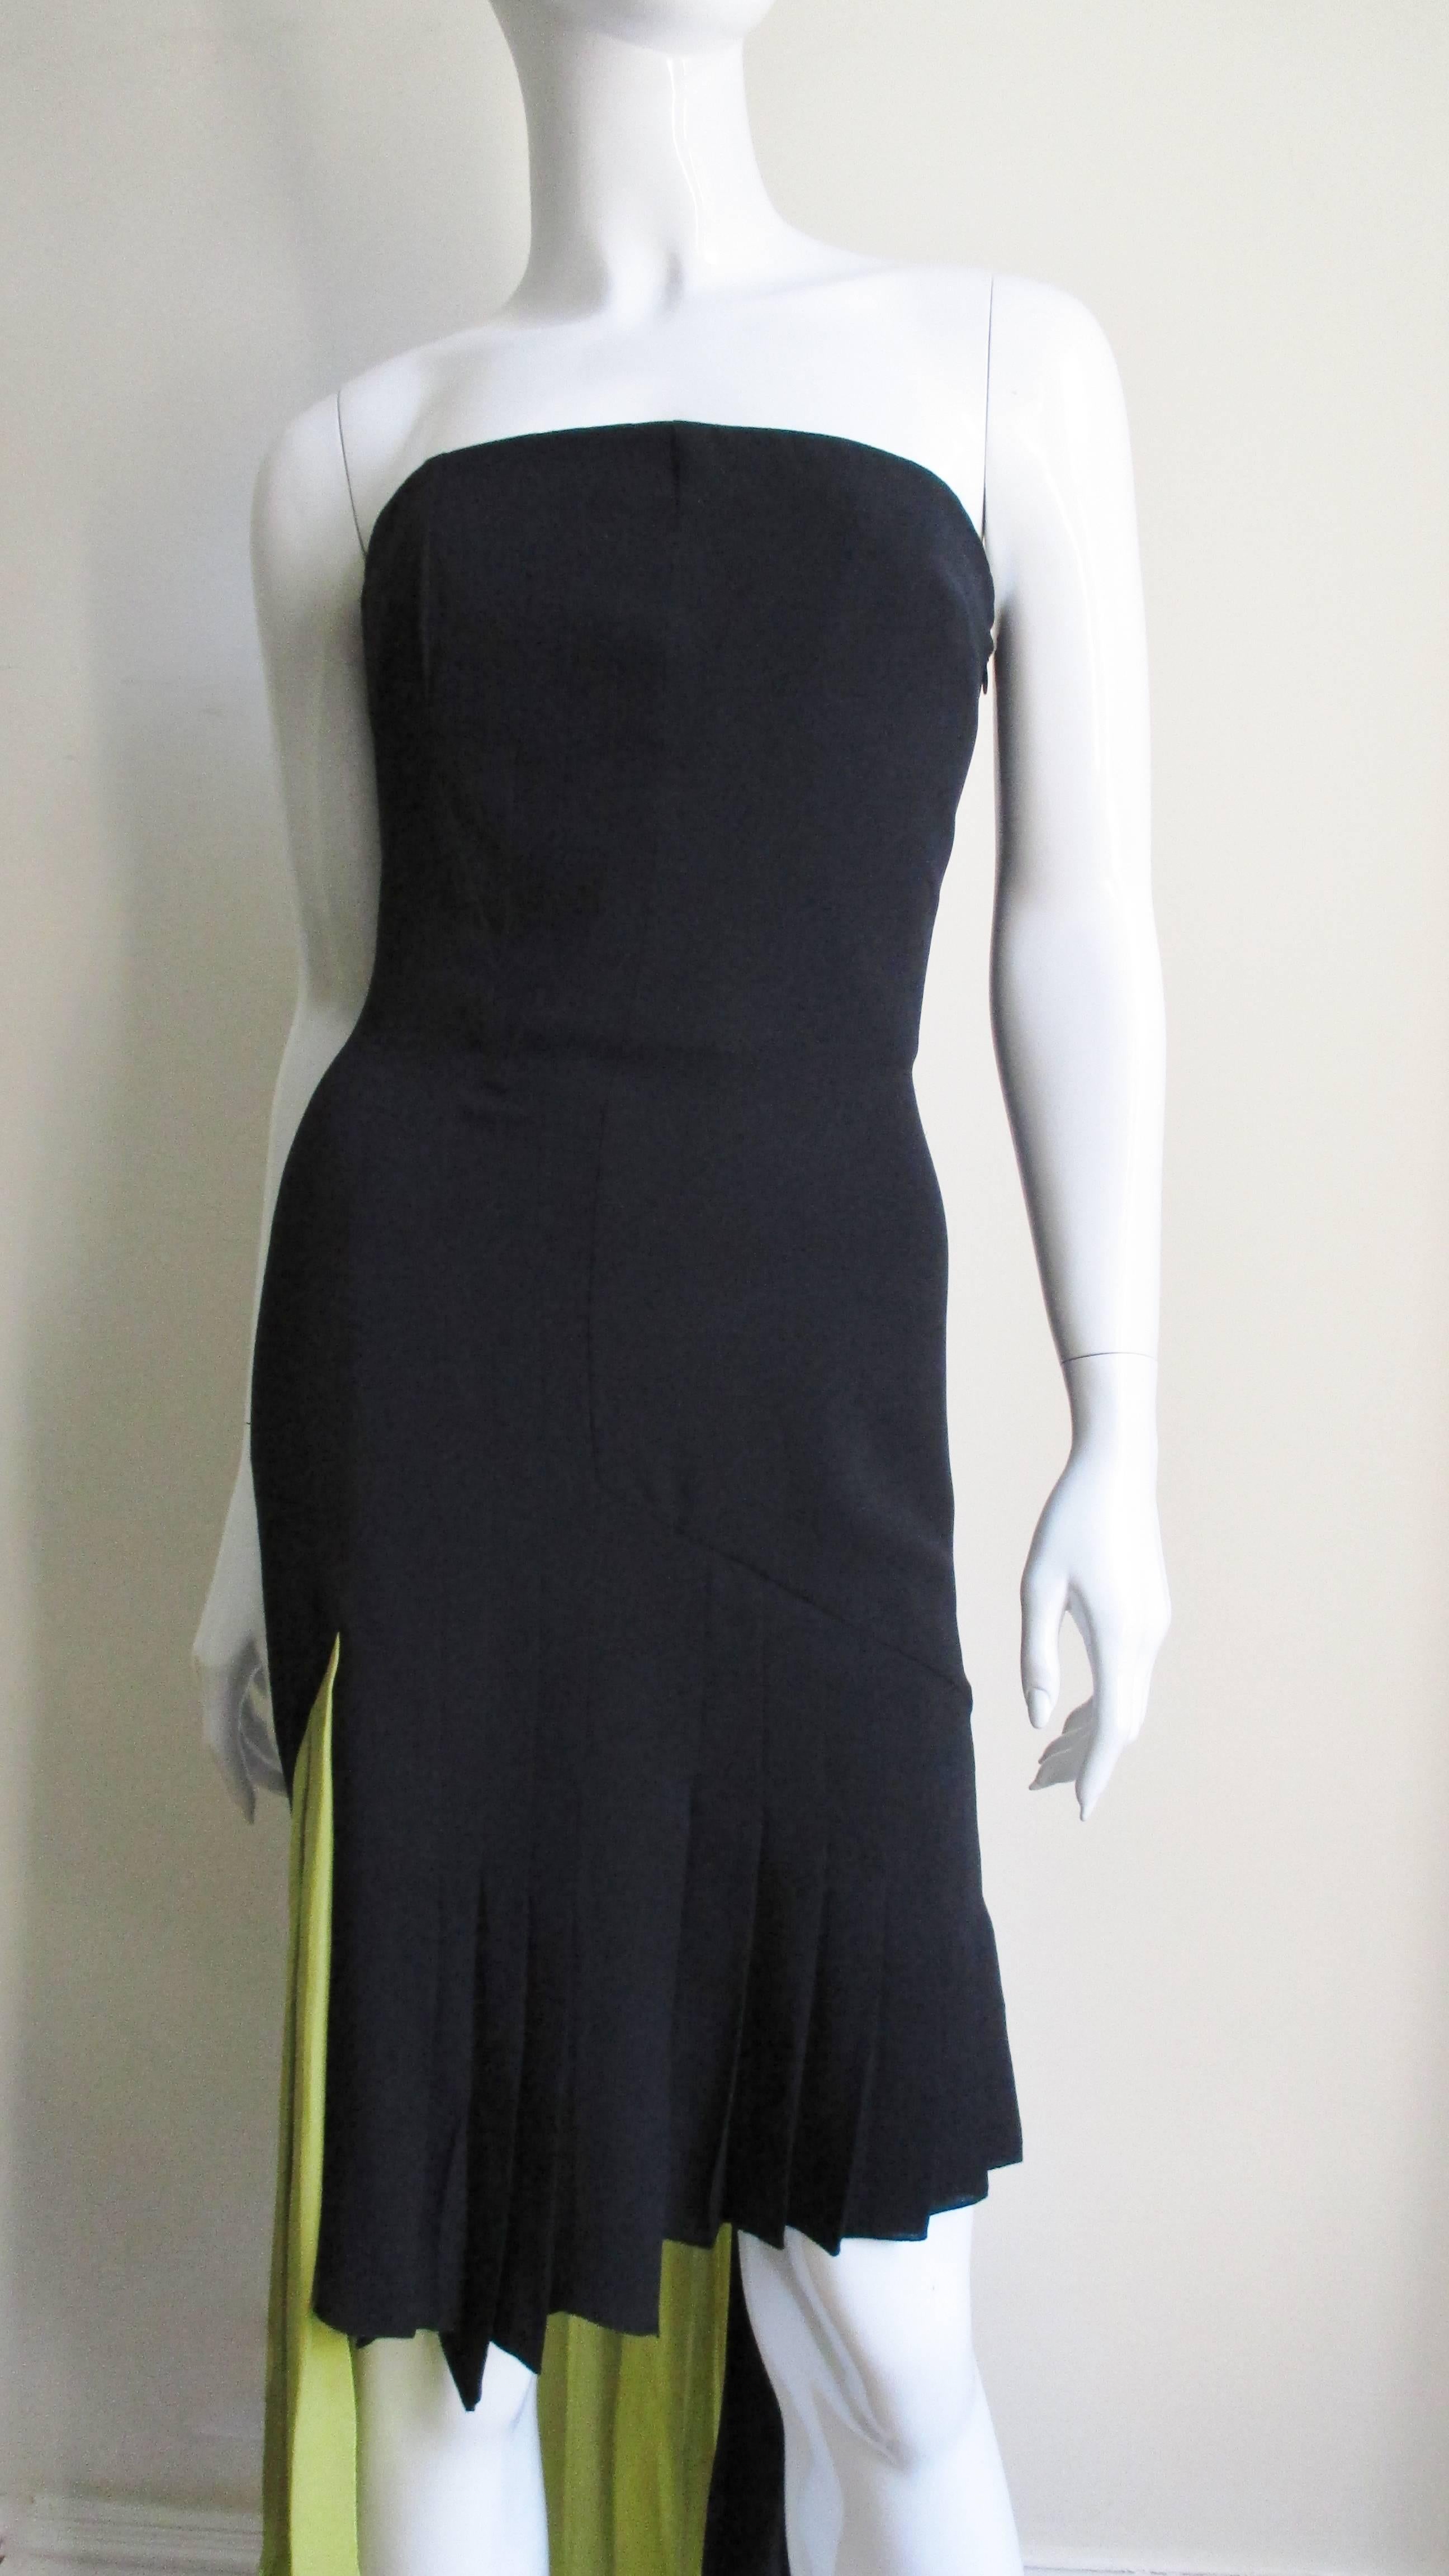 Black 1990s Gianni Versace Color Block Bustier Dress with Lime Train